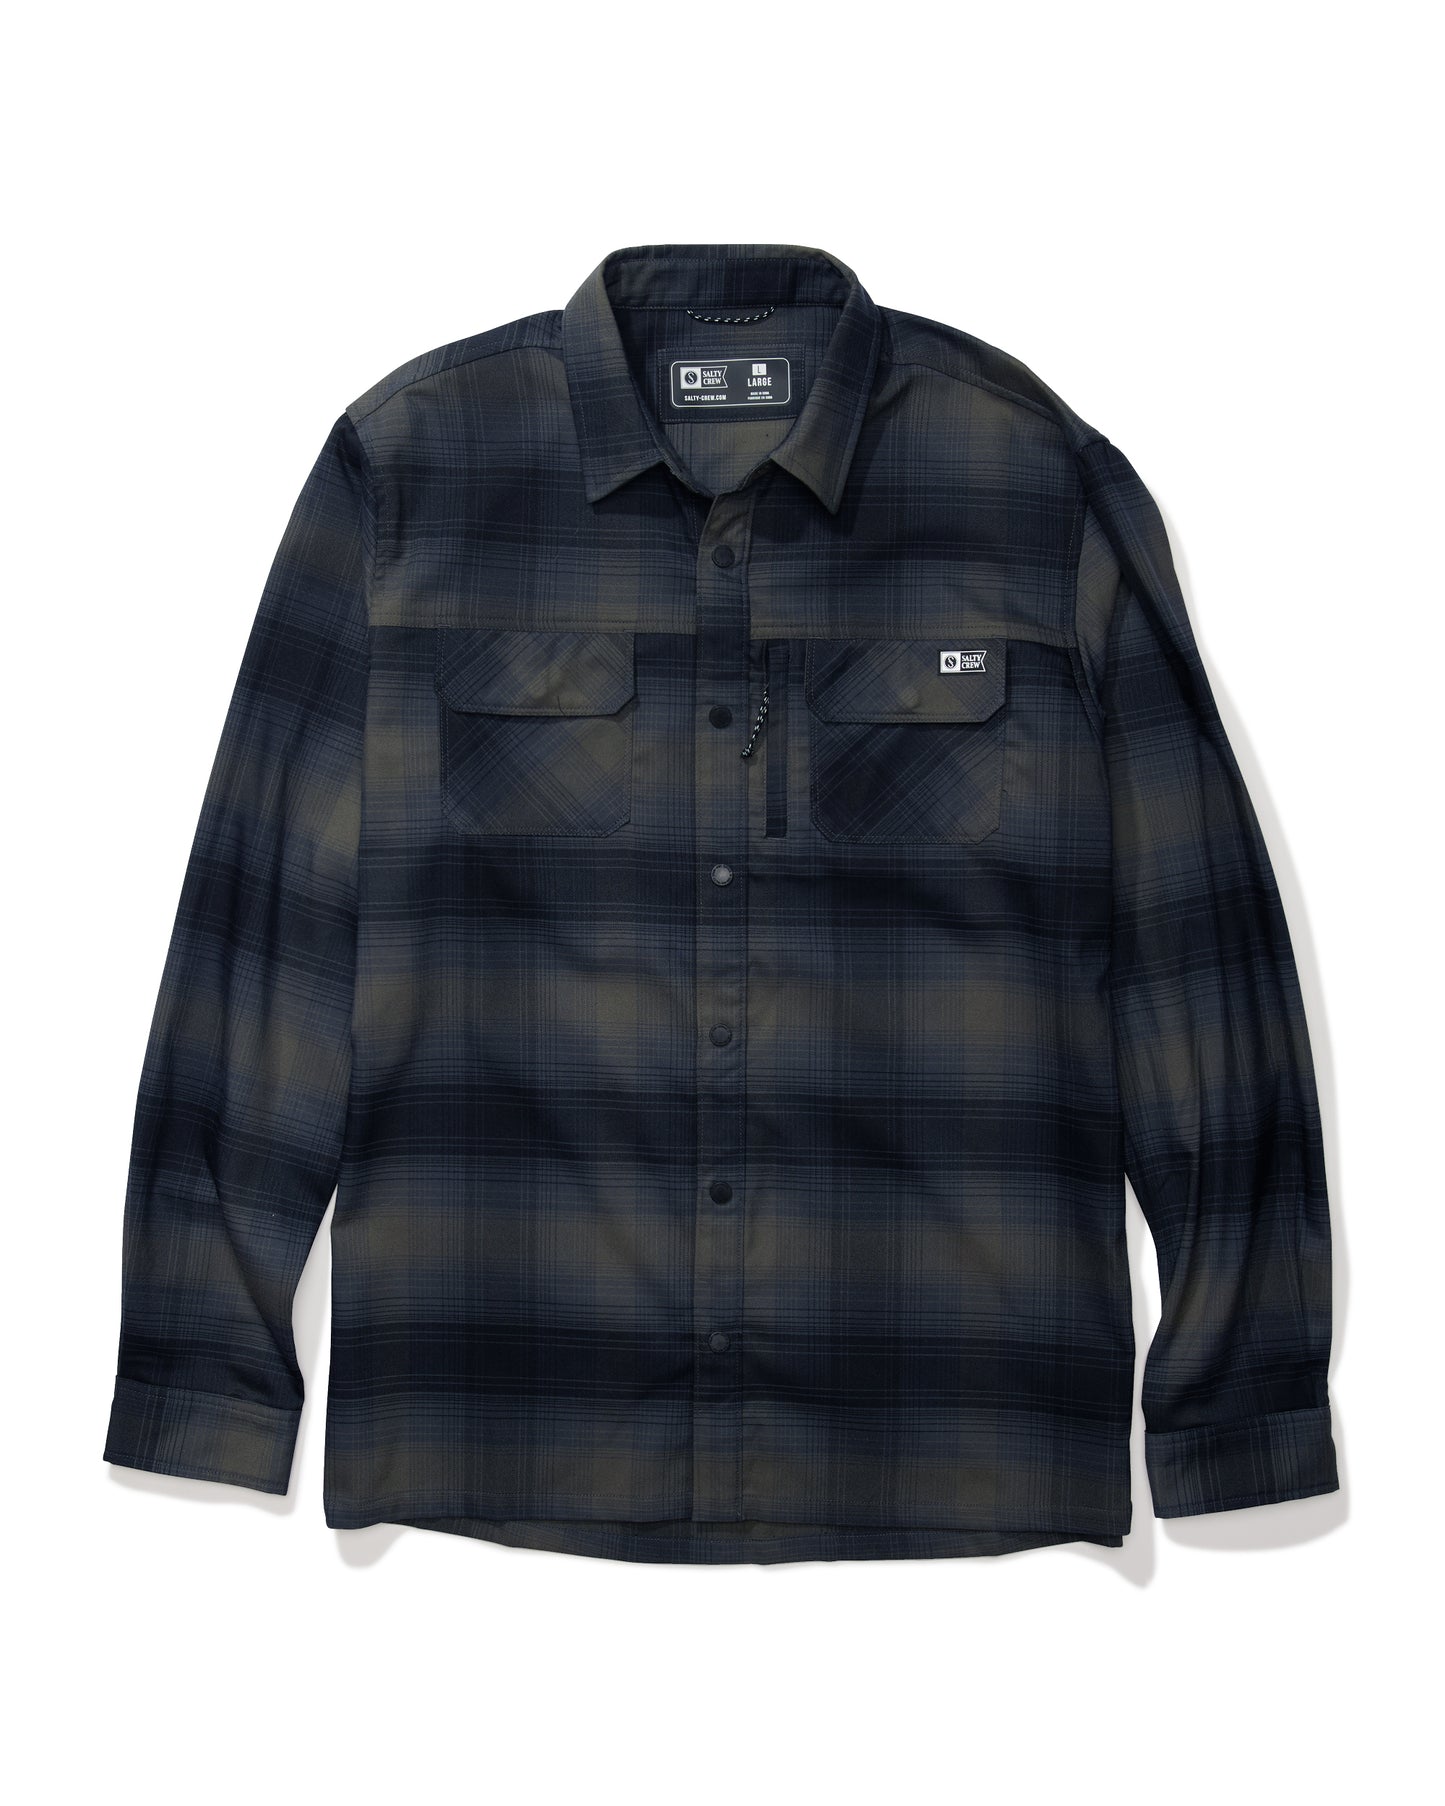 Off body front of the Fathom Black Tech Flannel